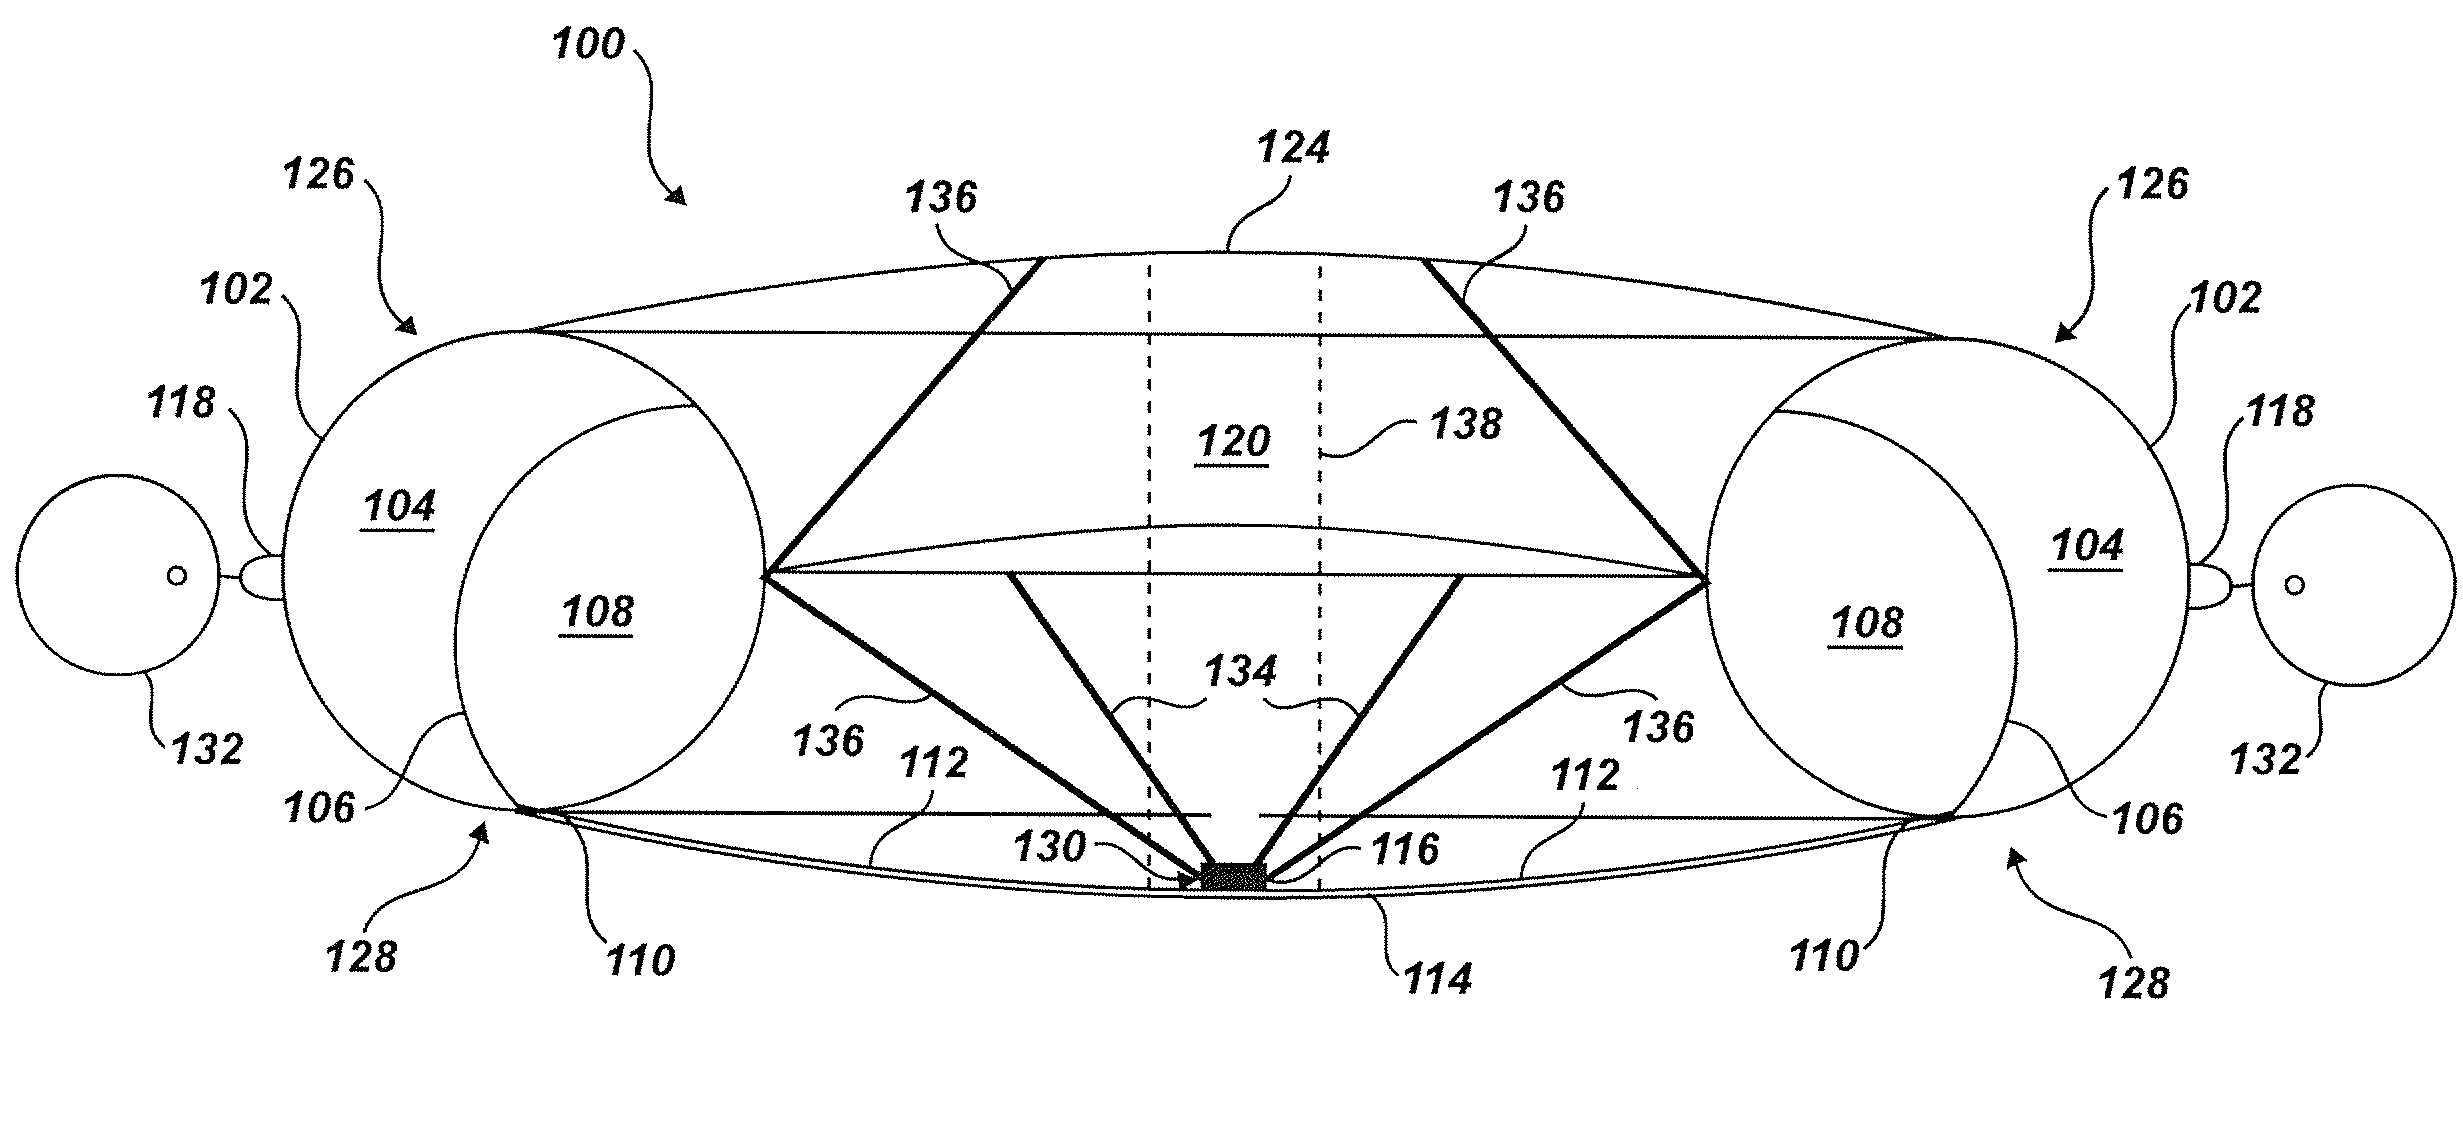 Buoyancy control system for an airship